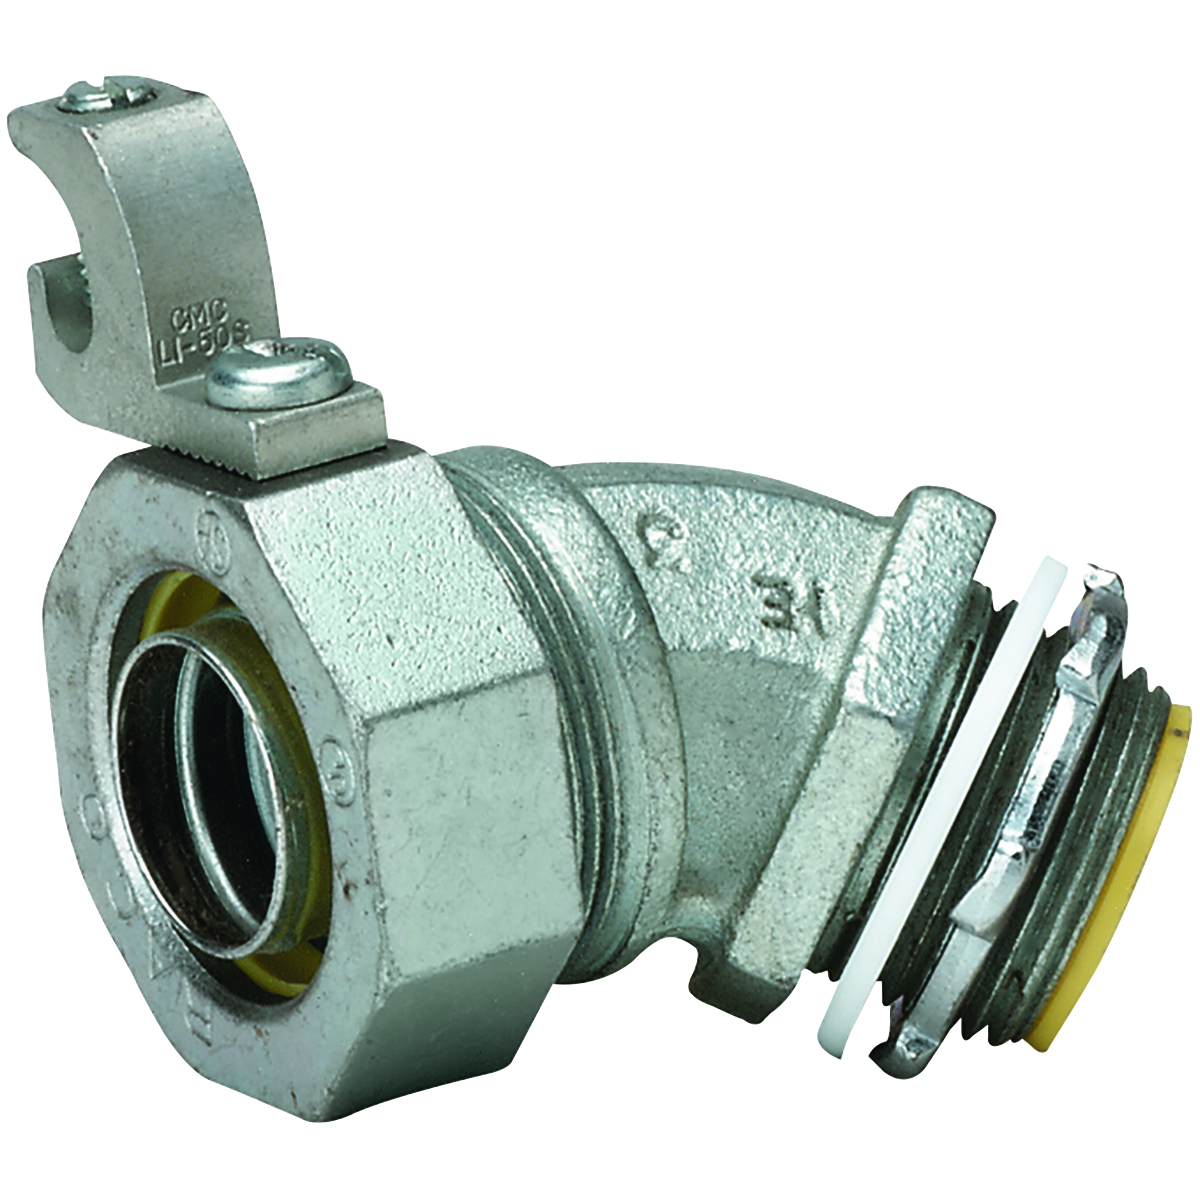 K SERIES FITTINGS - GROUNDED LIQUIDTIGHT CONNECTORS - K LIQUIDTIGHTGROUNDING STYLE - 45 DEGREE INSULATED - NPT SIZE 1-1/2 IN